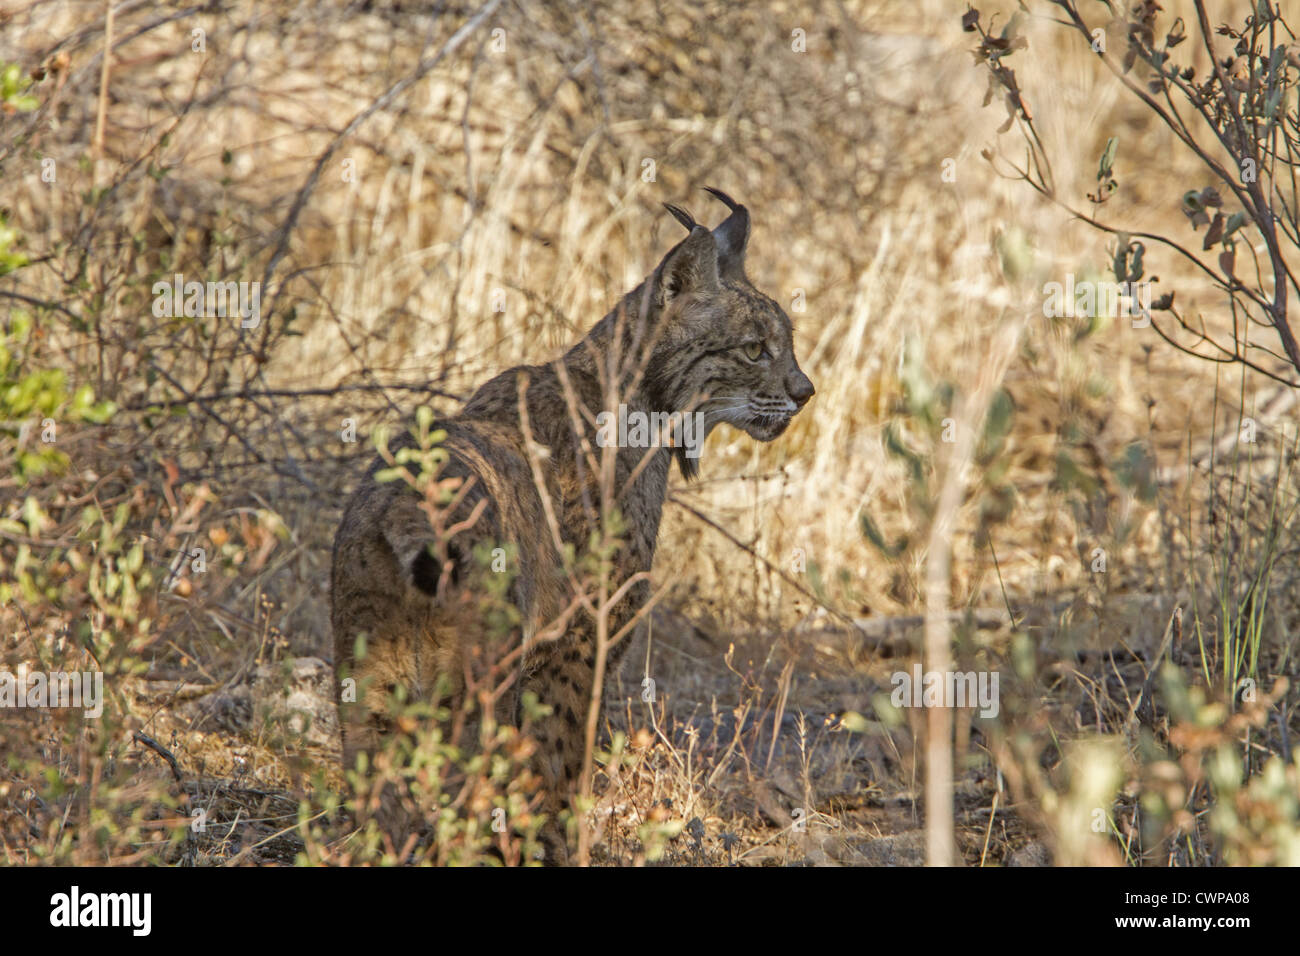 Another name for the Iberian Lynx is the Pardel Lynx (the scientific name is Lynx pardinus), meaning leopard-spotted and indeed Stock Photo